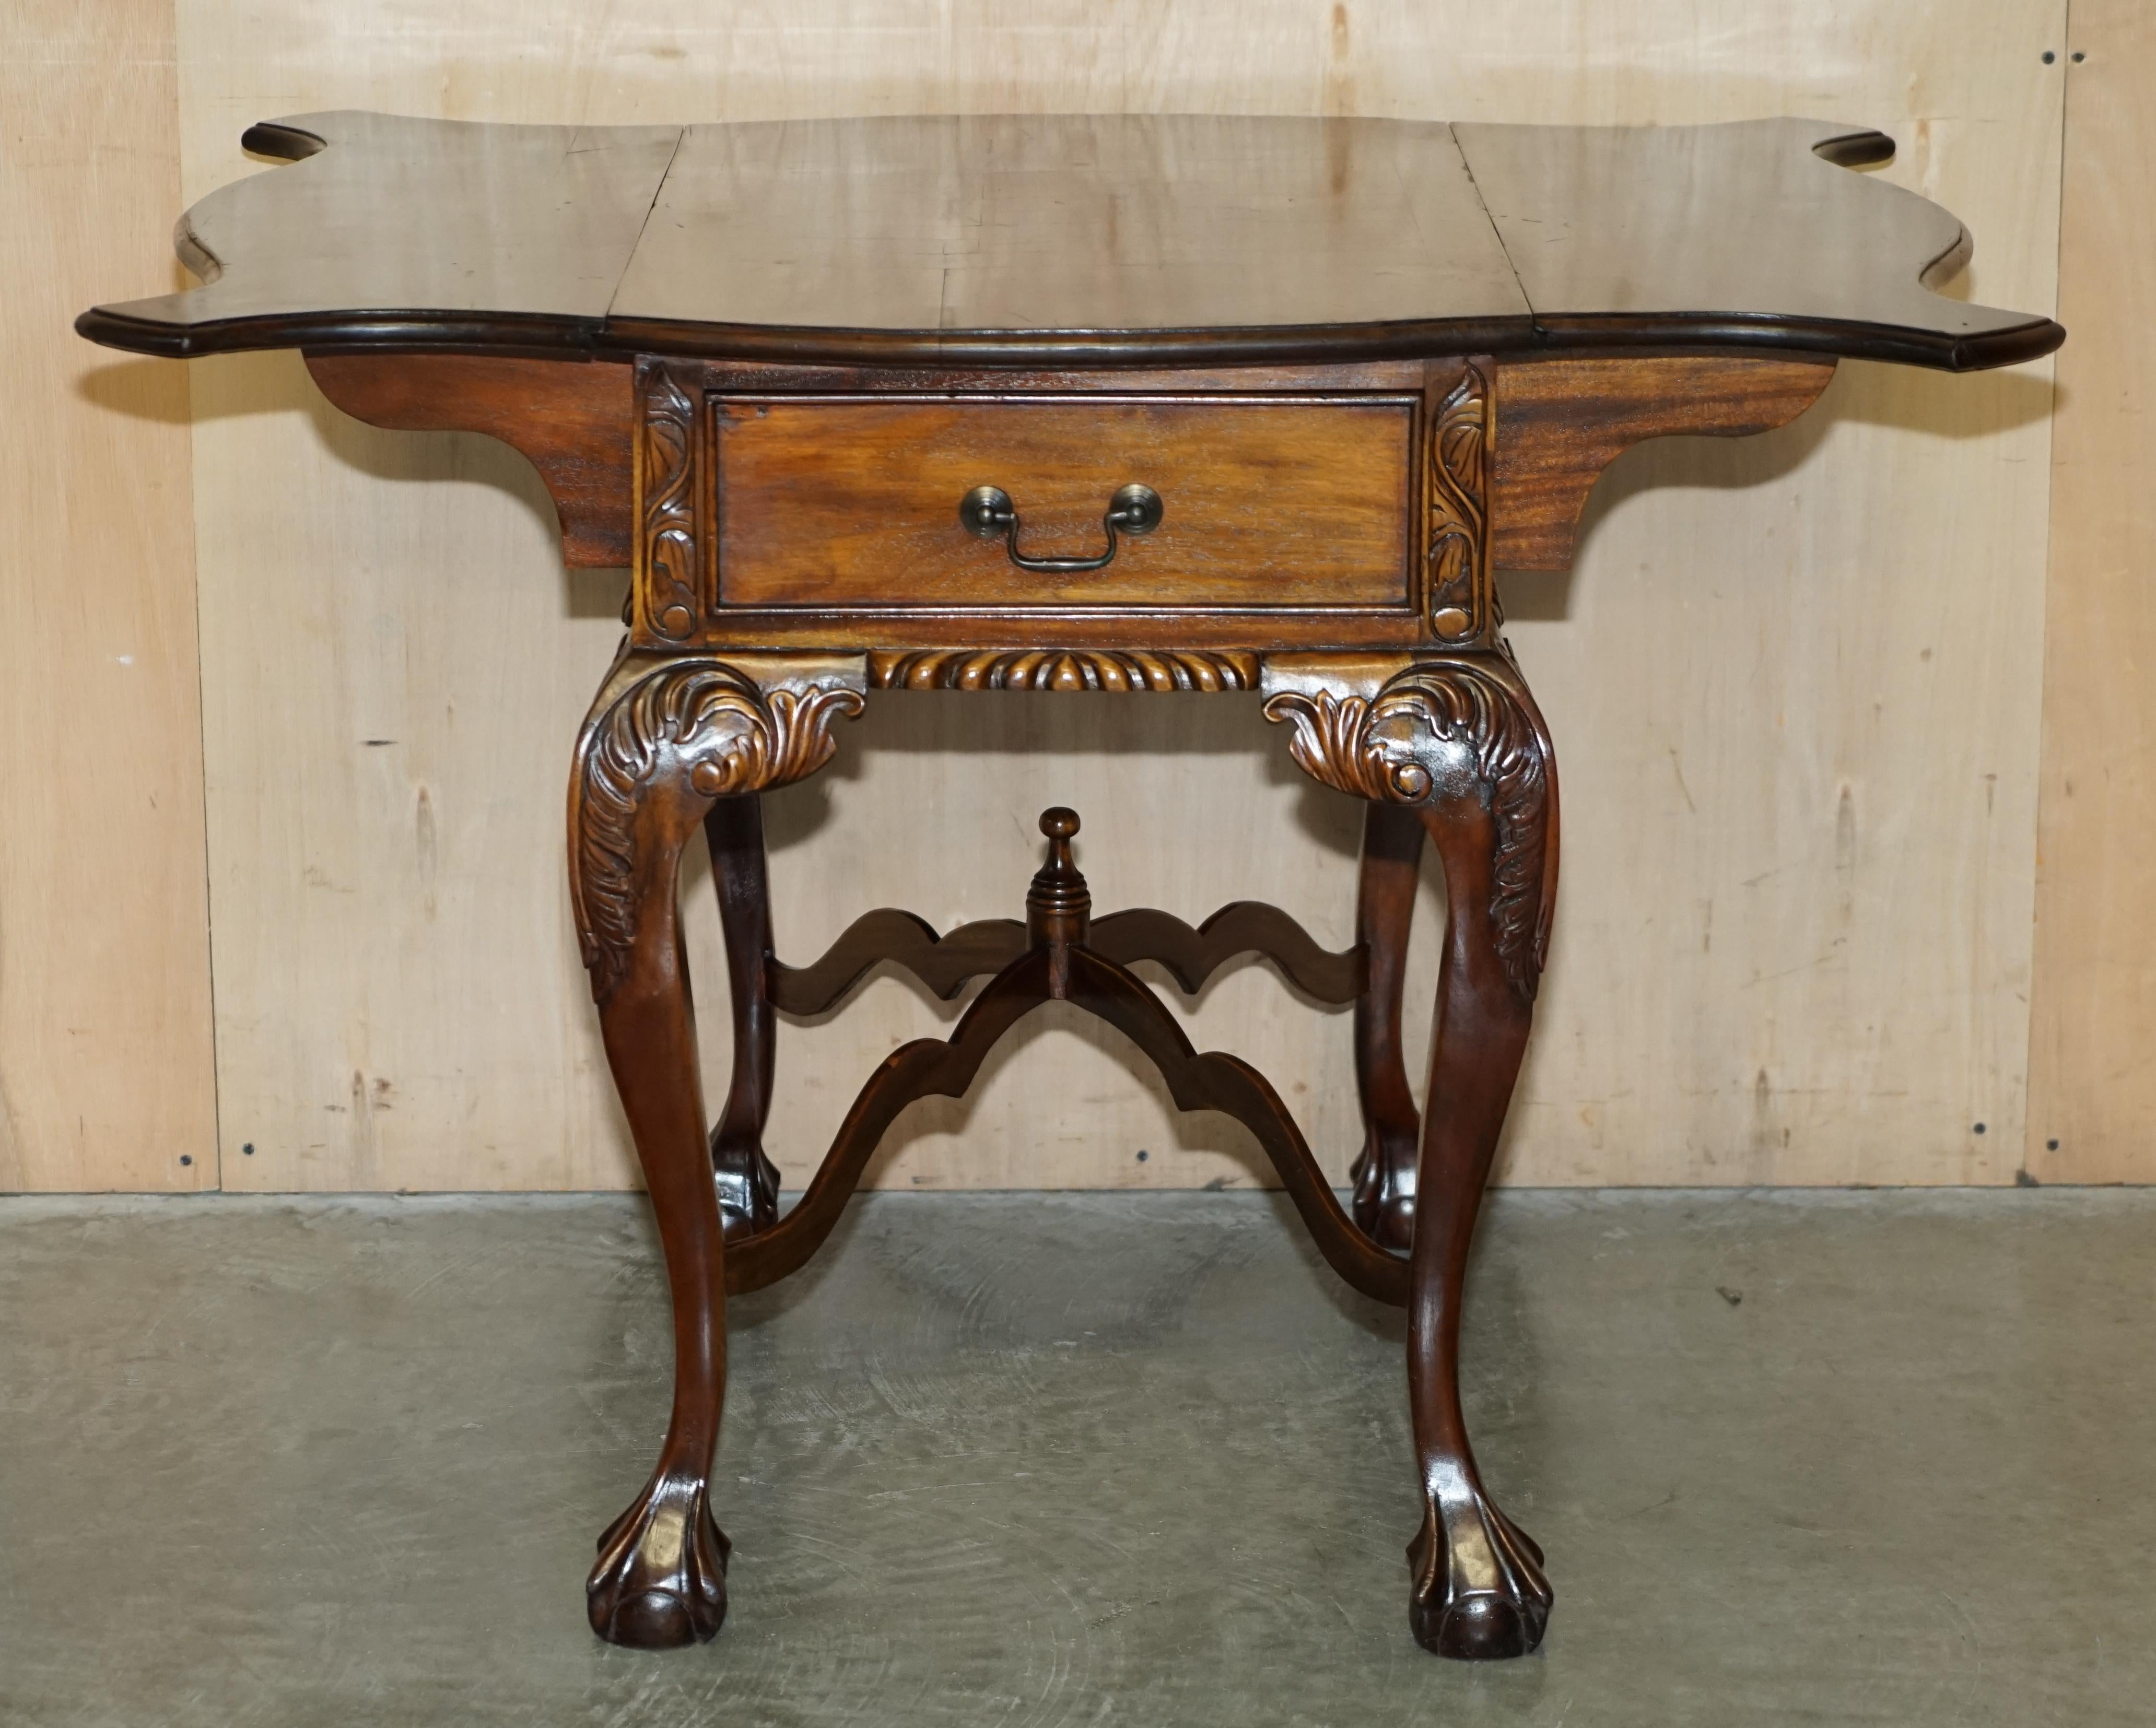 EXQUISITE TABLE DE CHESSAGE A PIEDS The Claw & Ball EXTENDiNG CHESS BOARD STYLE Thomas Chippendale en vente 2